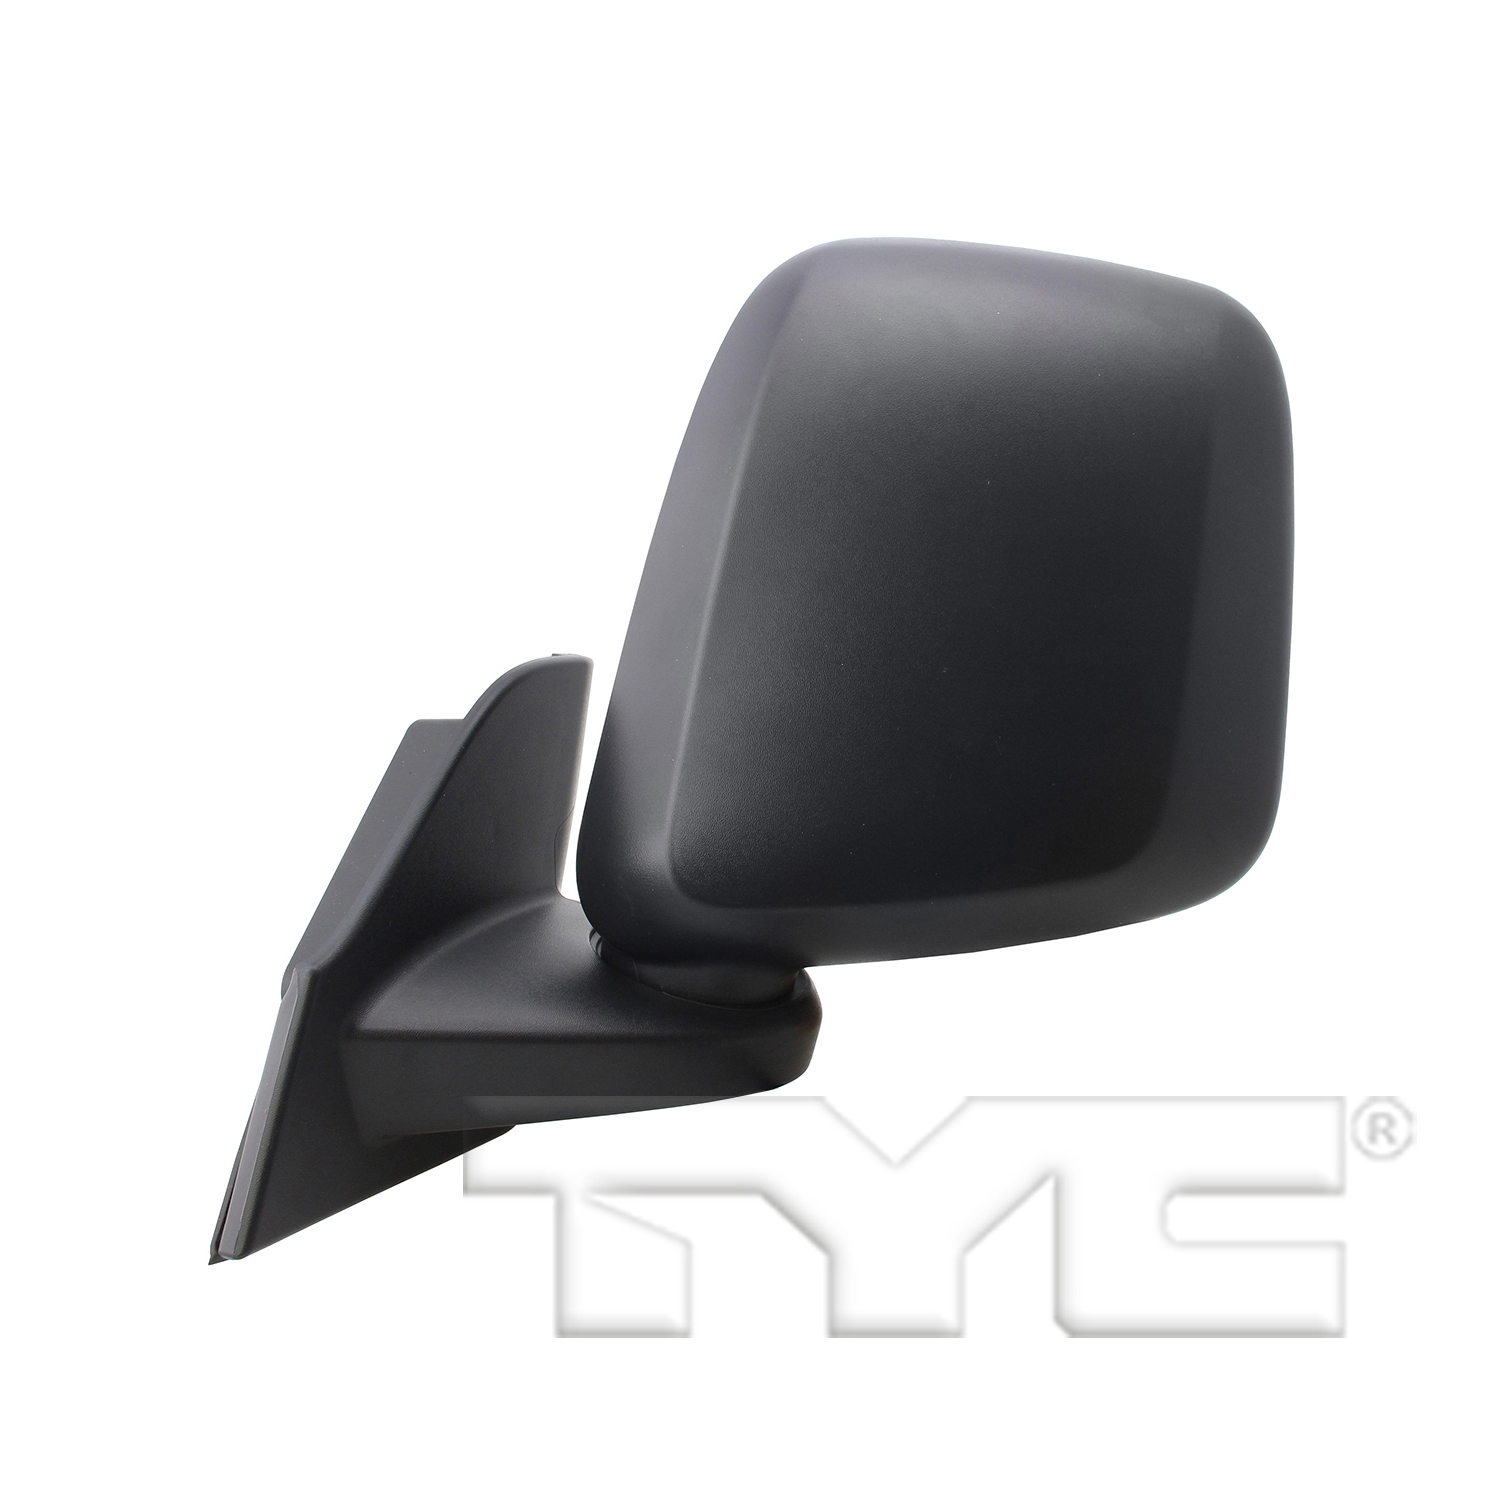 Aftermarket MIRRORS for NISSAN - NV200, NV200,13-21,LT Mirror outside rear view